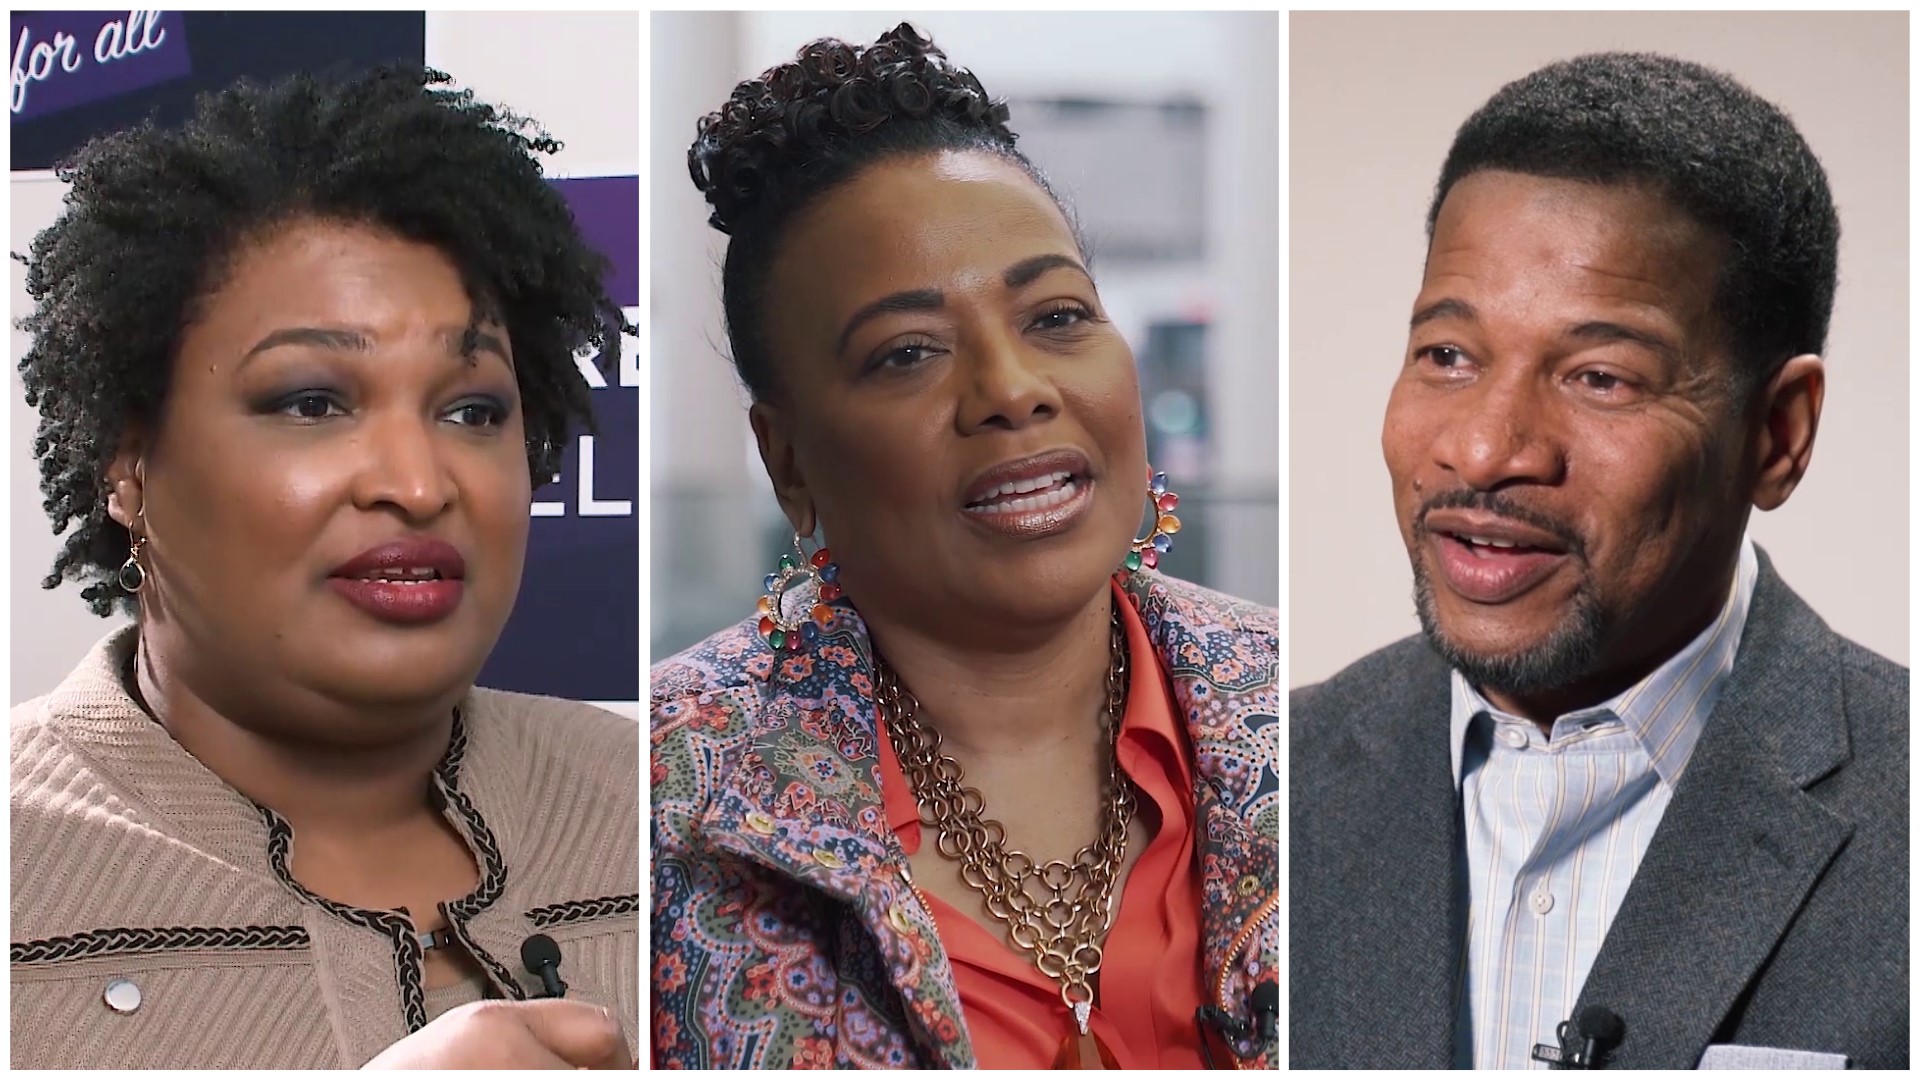 We speak to Pastor Lee Jenkins, Dr. Bernice King and Stacey Abrams about modern black leadership in America - and what significance that role holds in 2020.